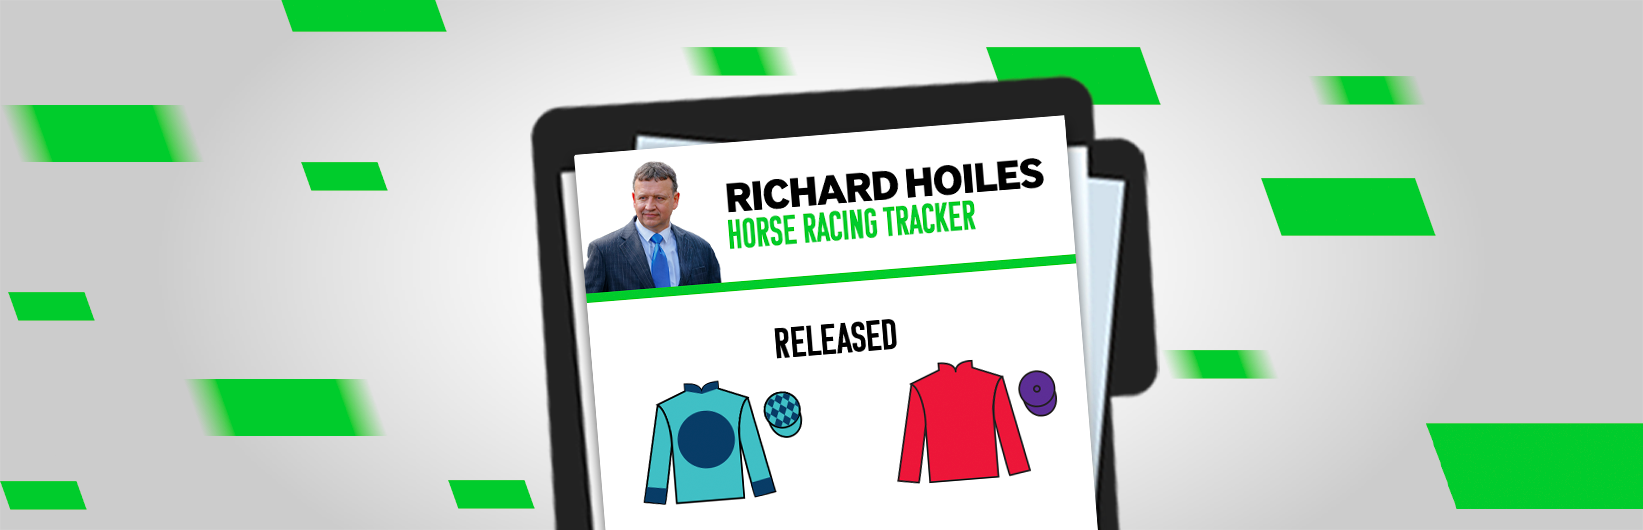 Richard Hoiles: 3 released, with 1 new addition to the tracker